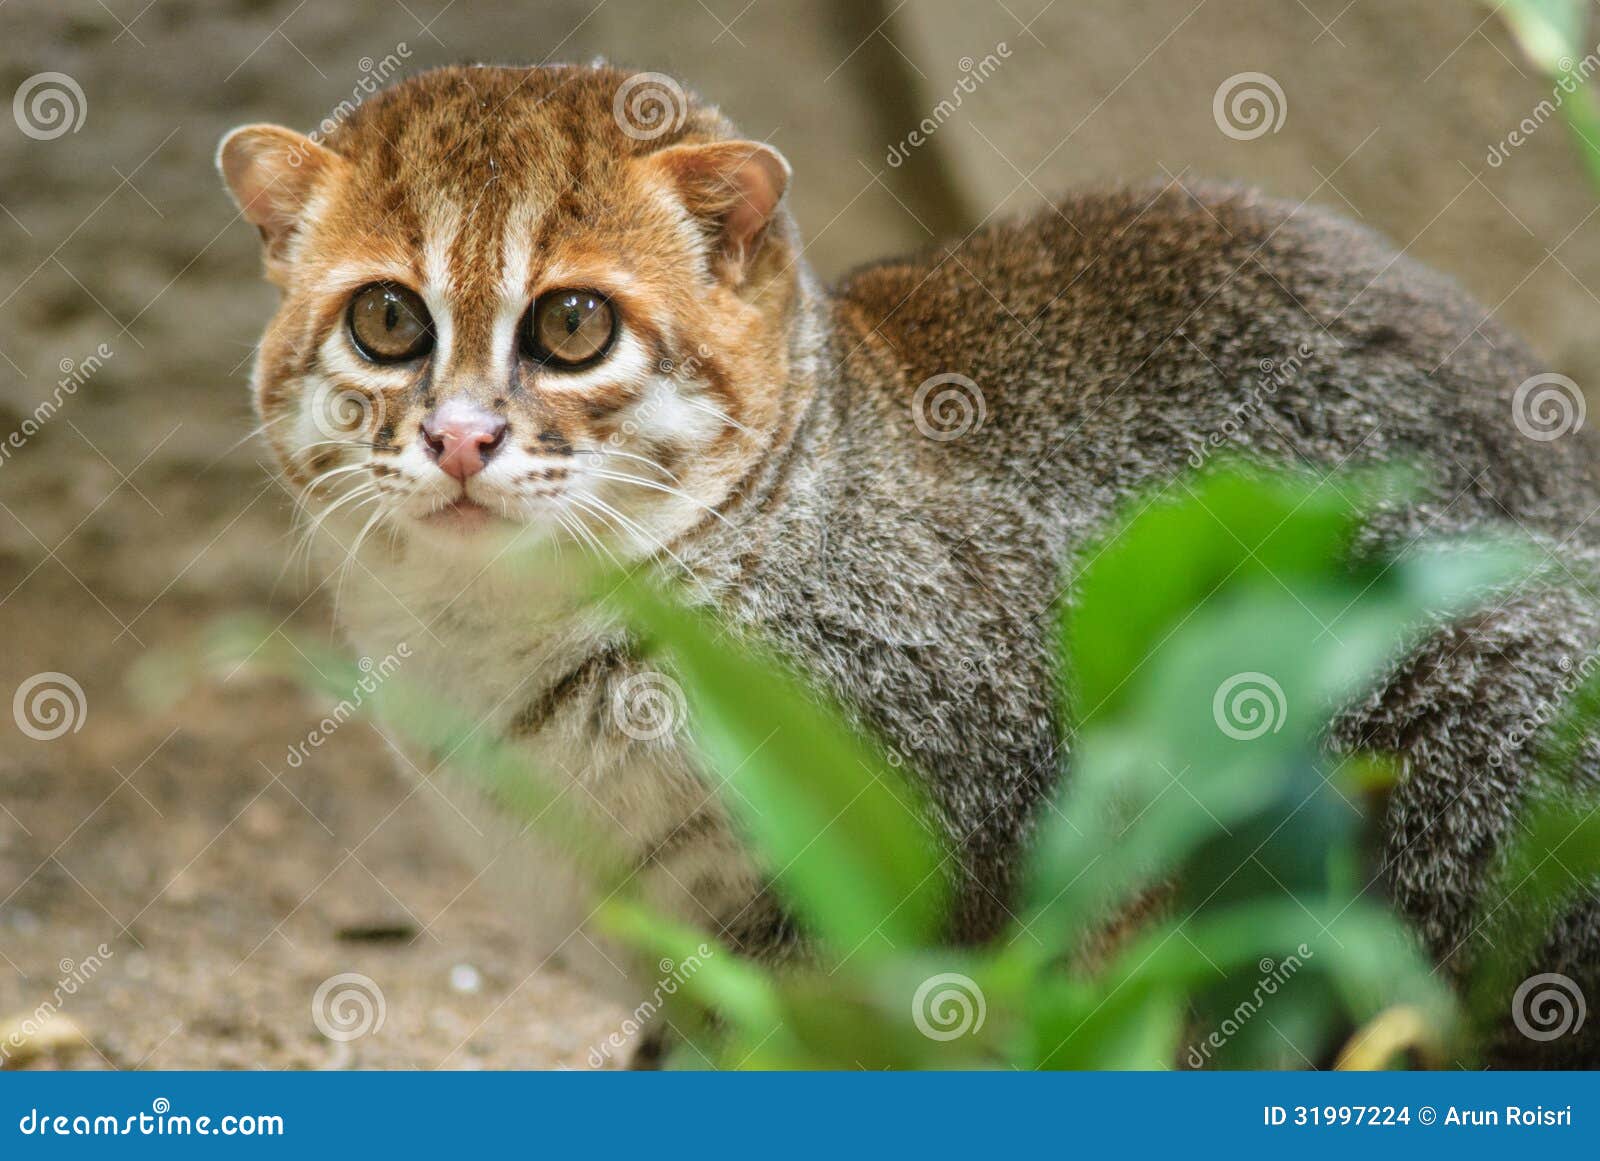 Flat-headed Cat Stock Images - Image: 31997224